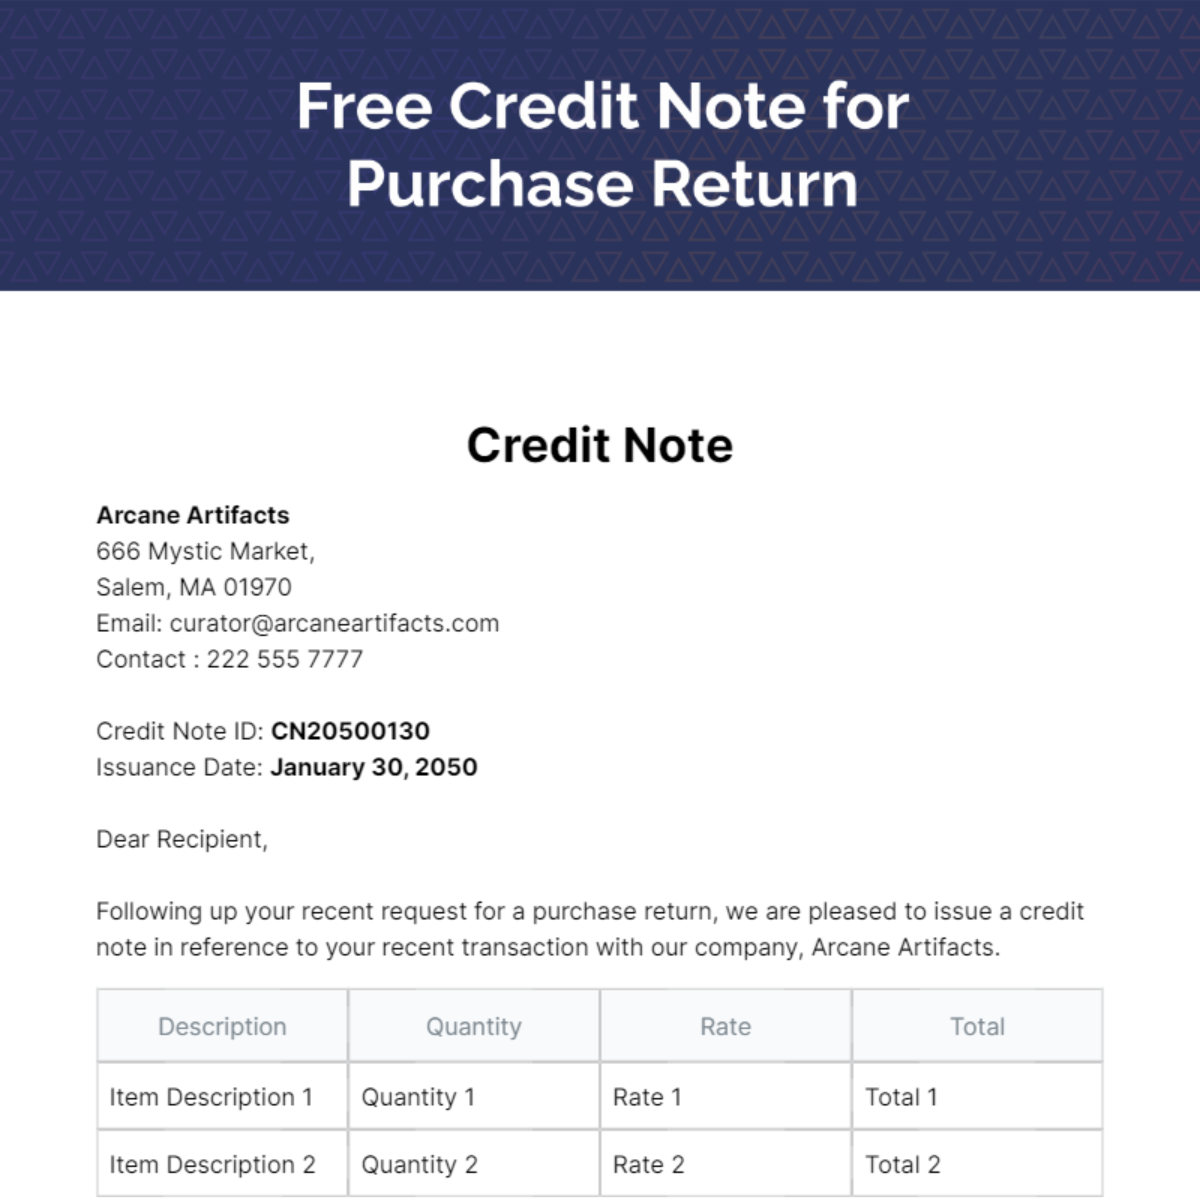 Credit Note for Purchase Return Template